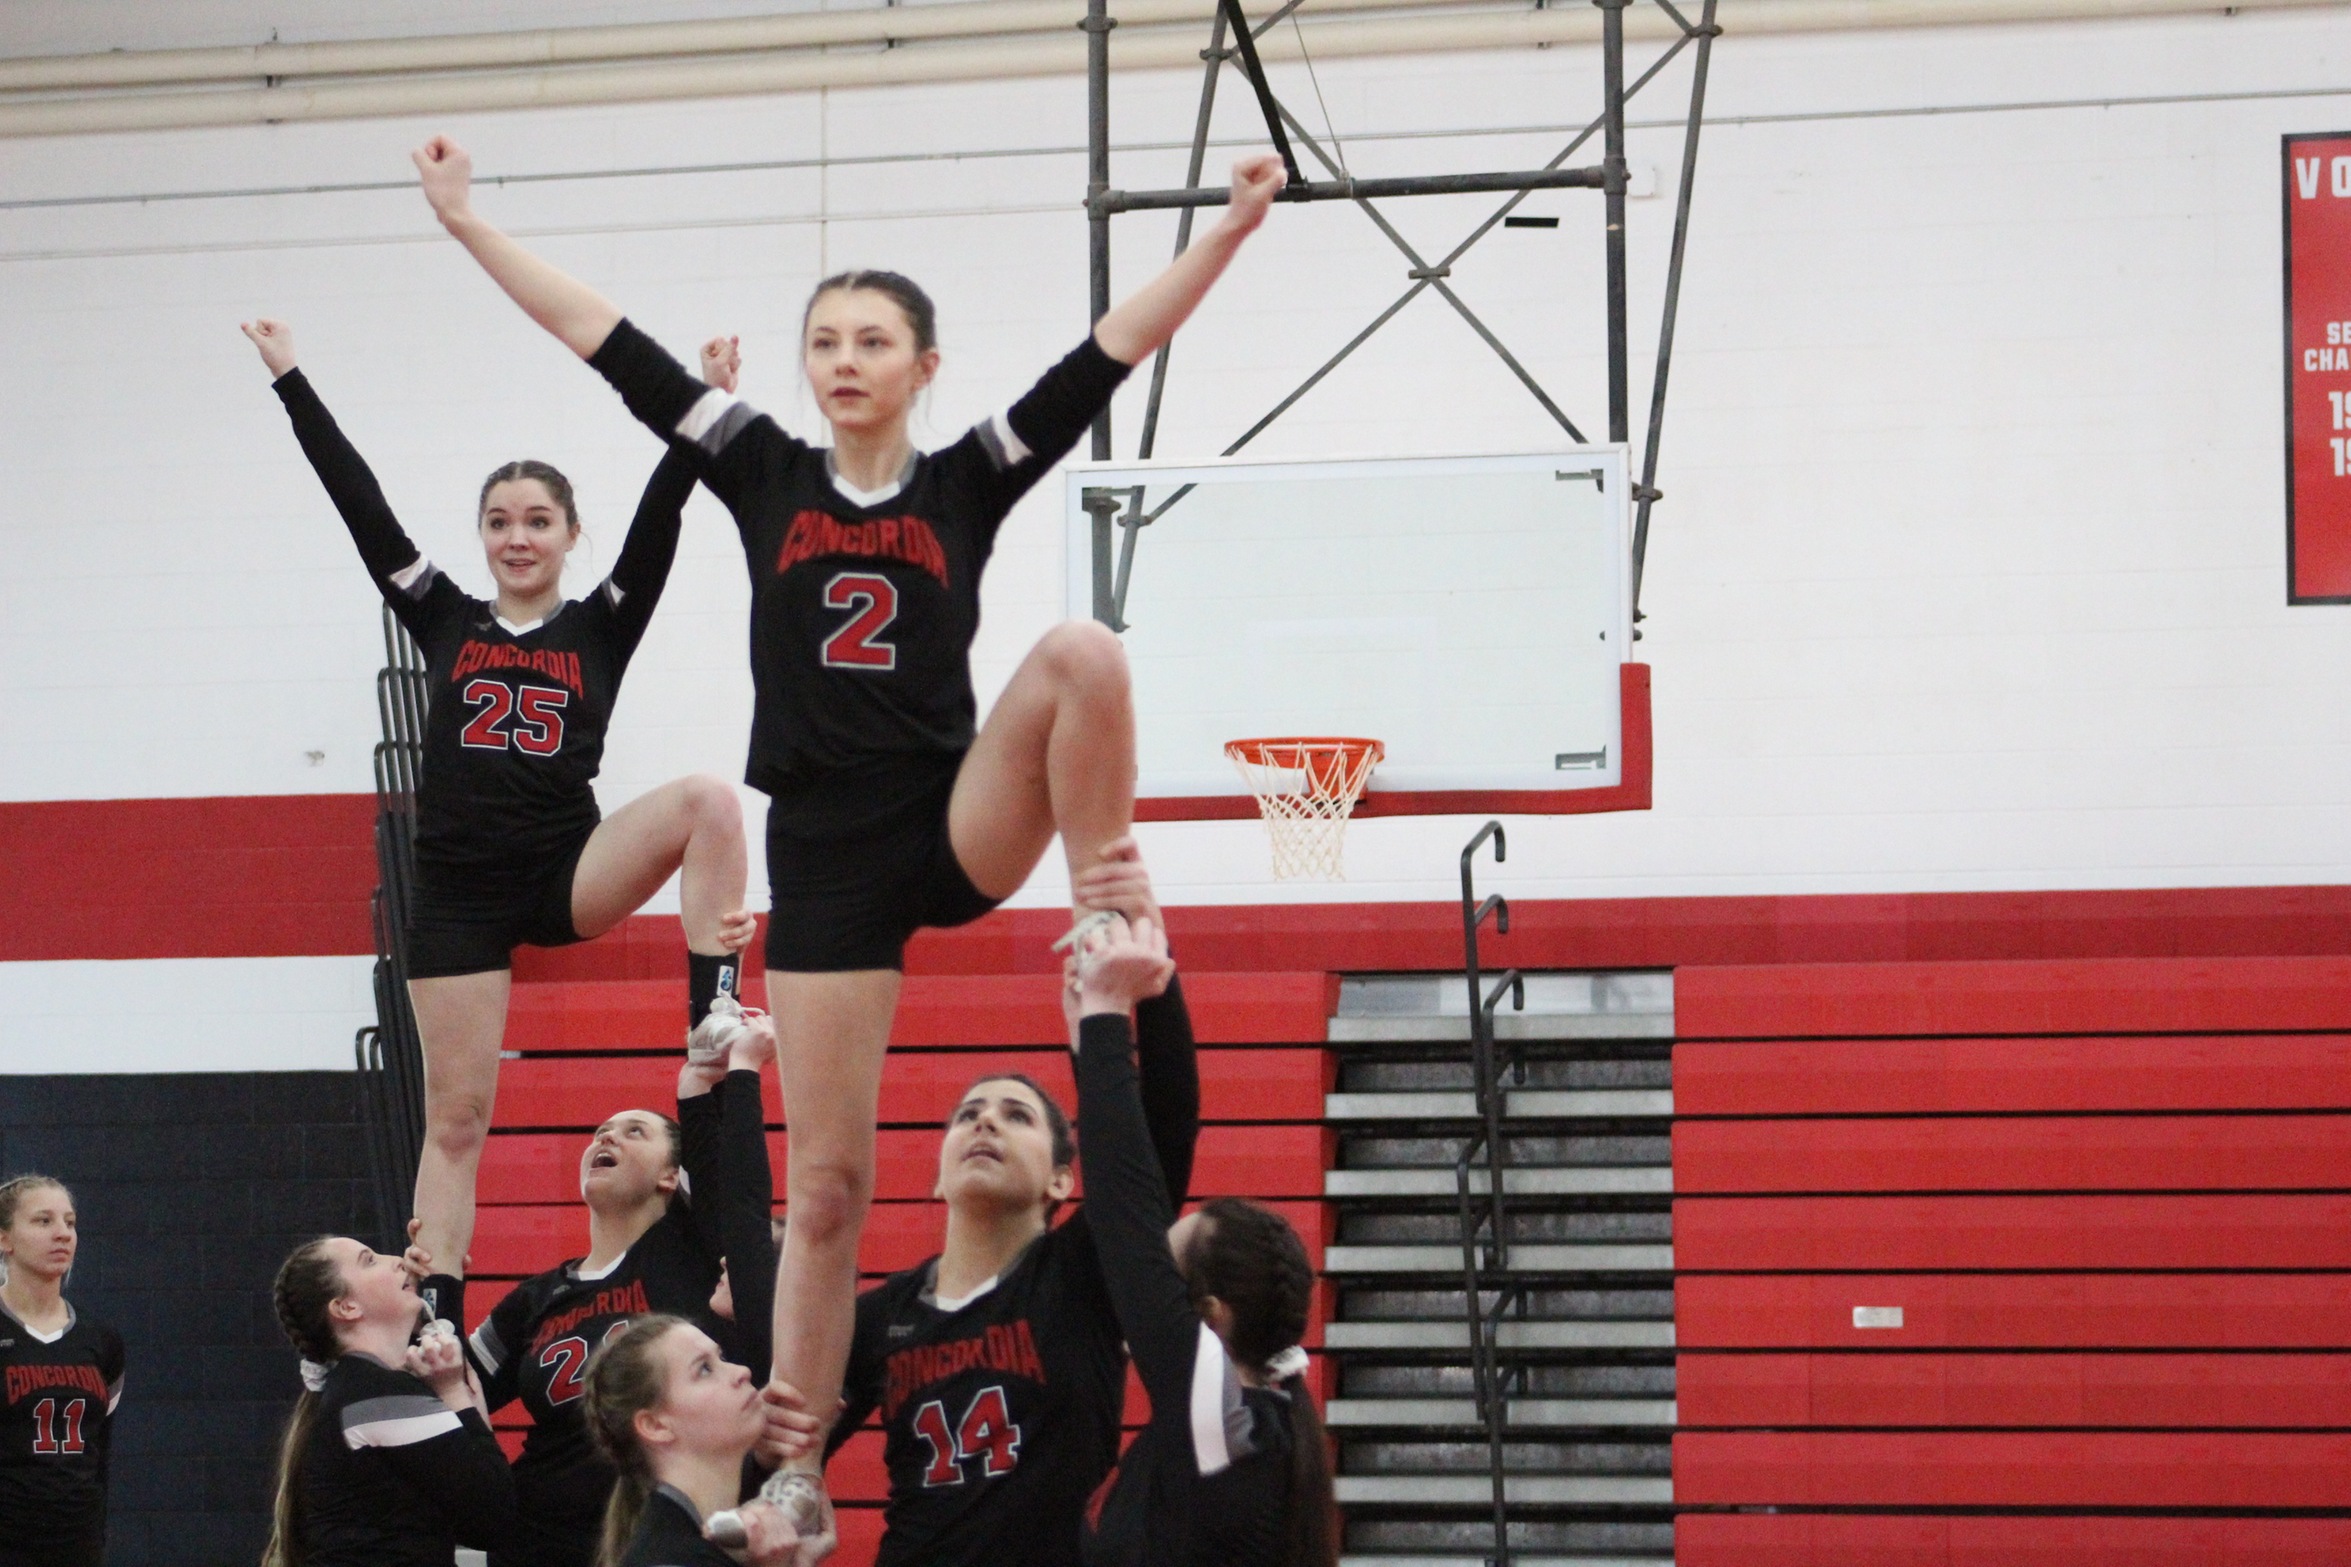 STUNT takes first win in program history